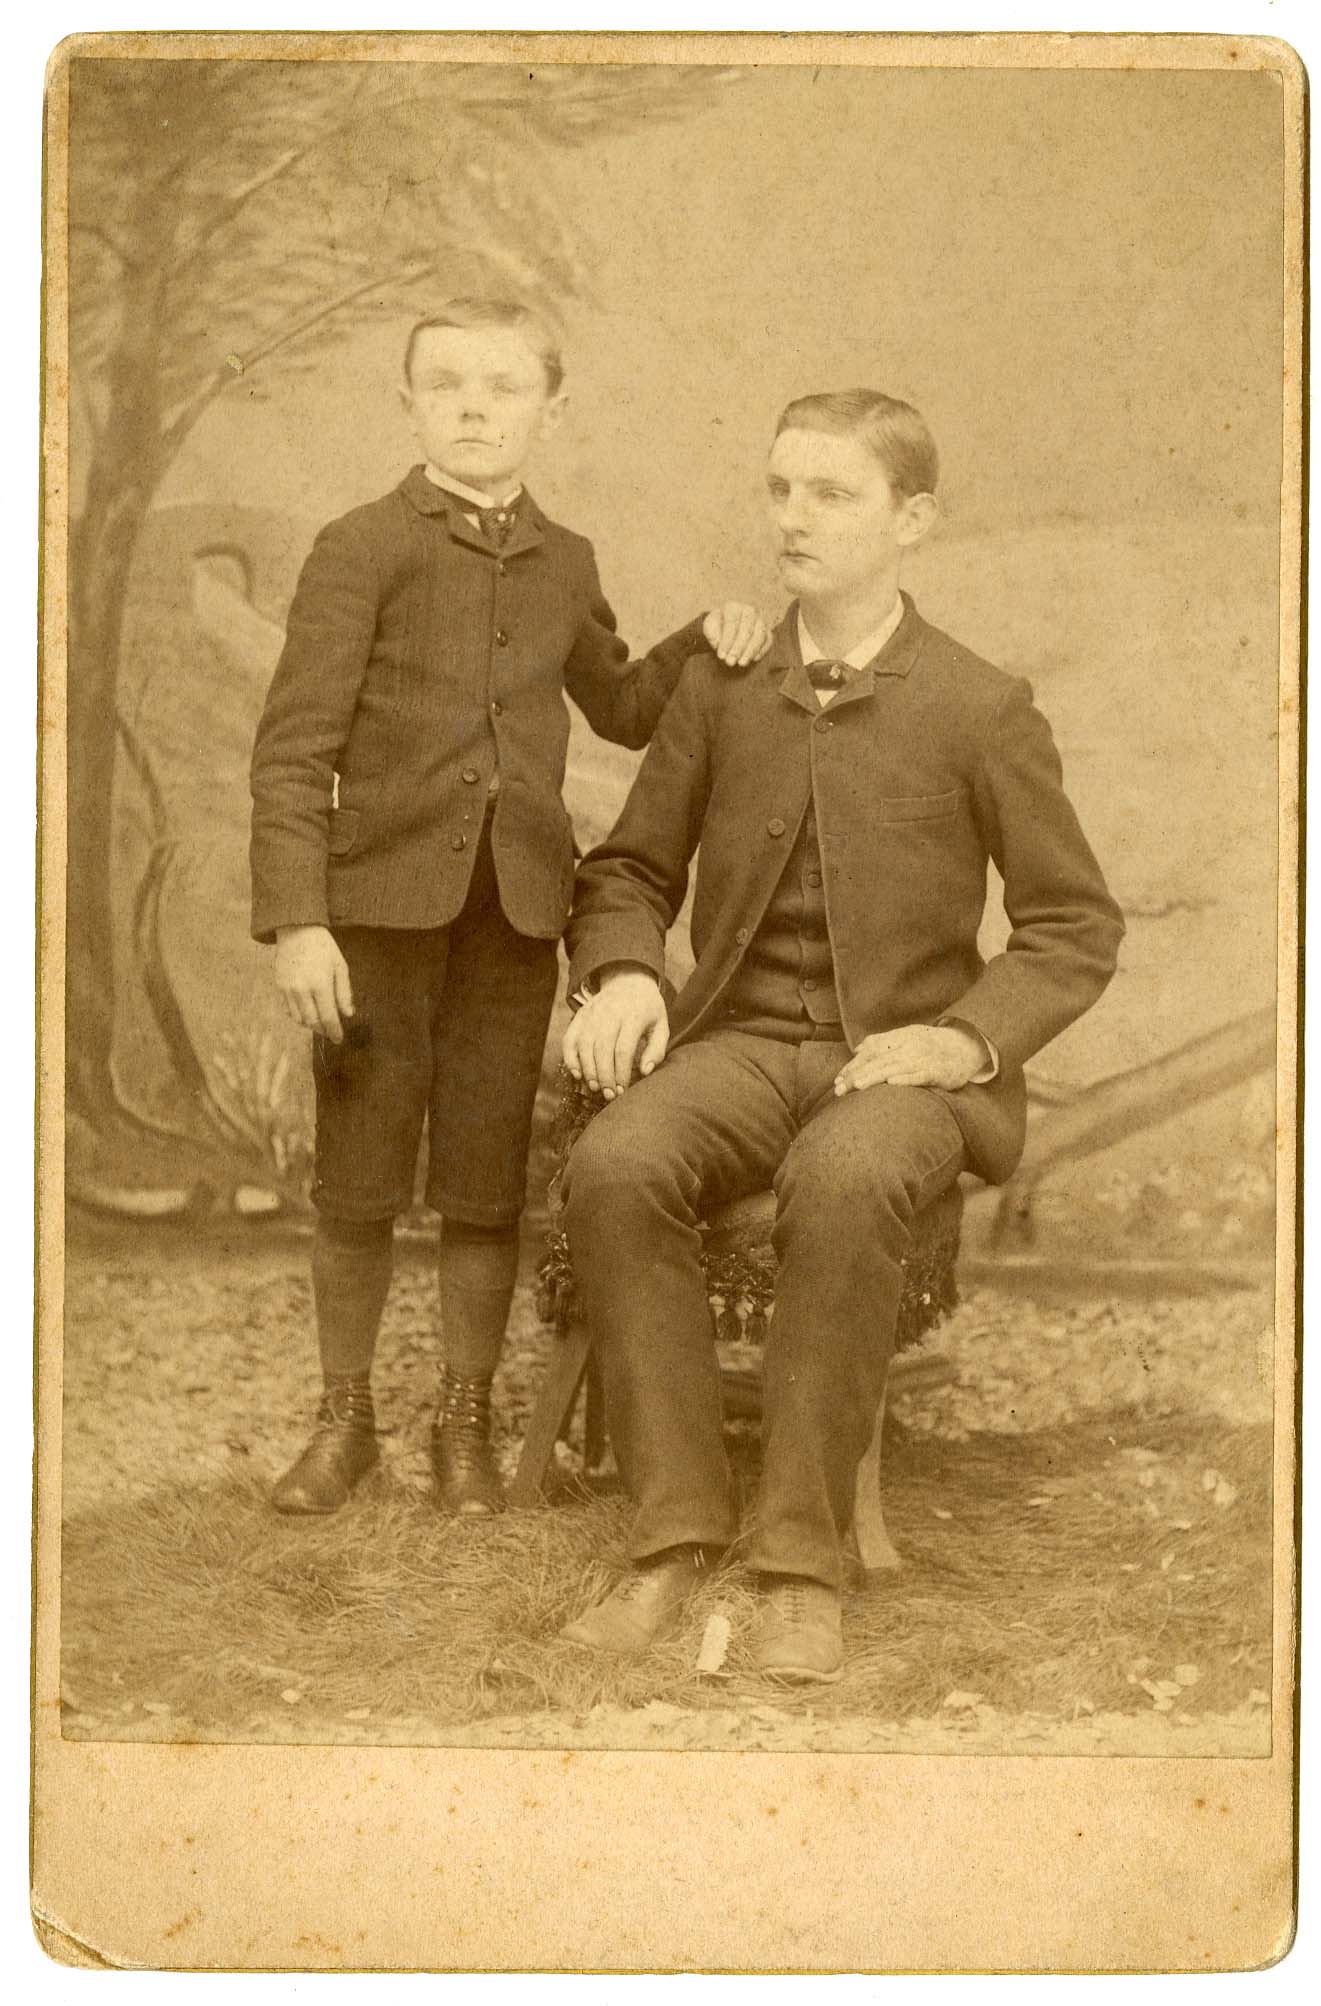 Jennings Kerr Owens and Manlus Doster Owens (older). Courtesy of the Creed Collection WU Pettus Archives, 2024